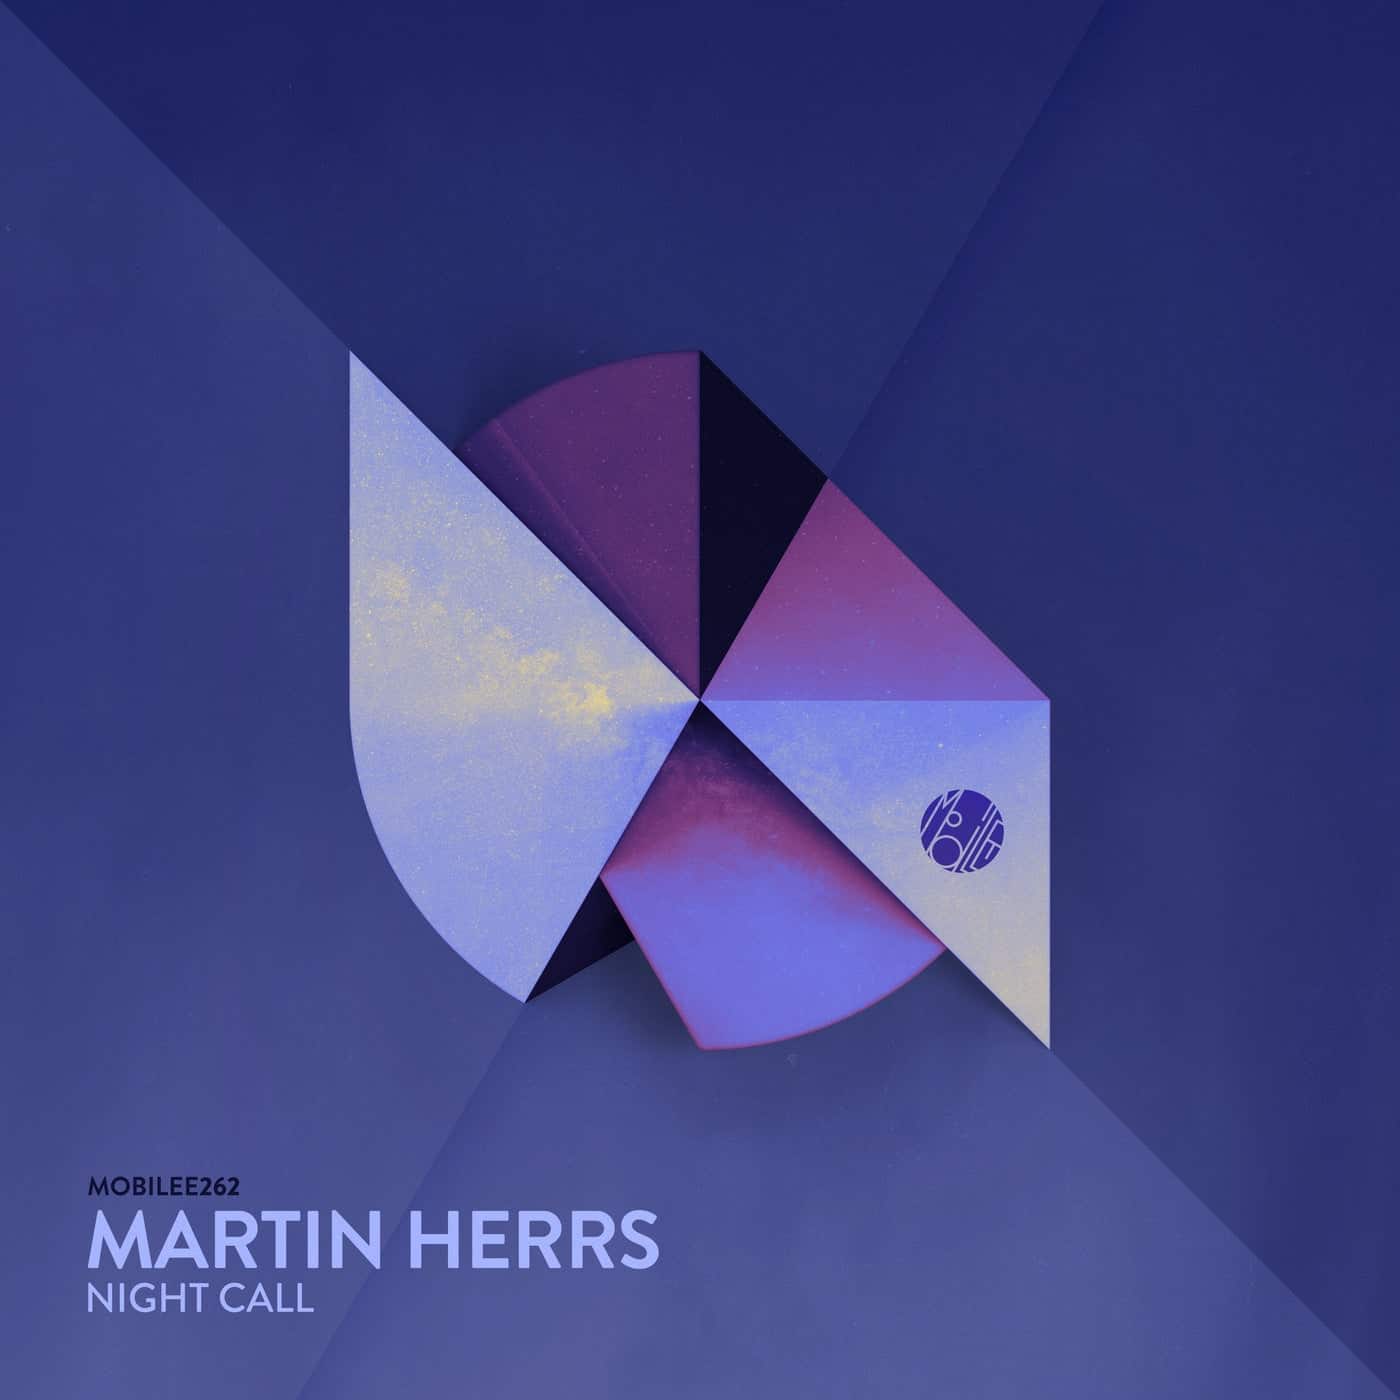 Download Martin HERRS - Night Call on Electrobuzz